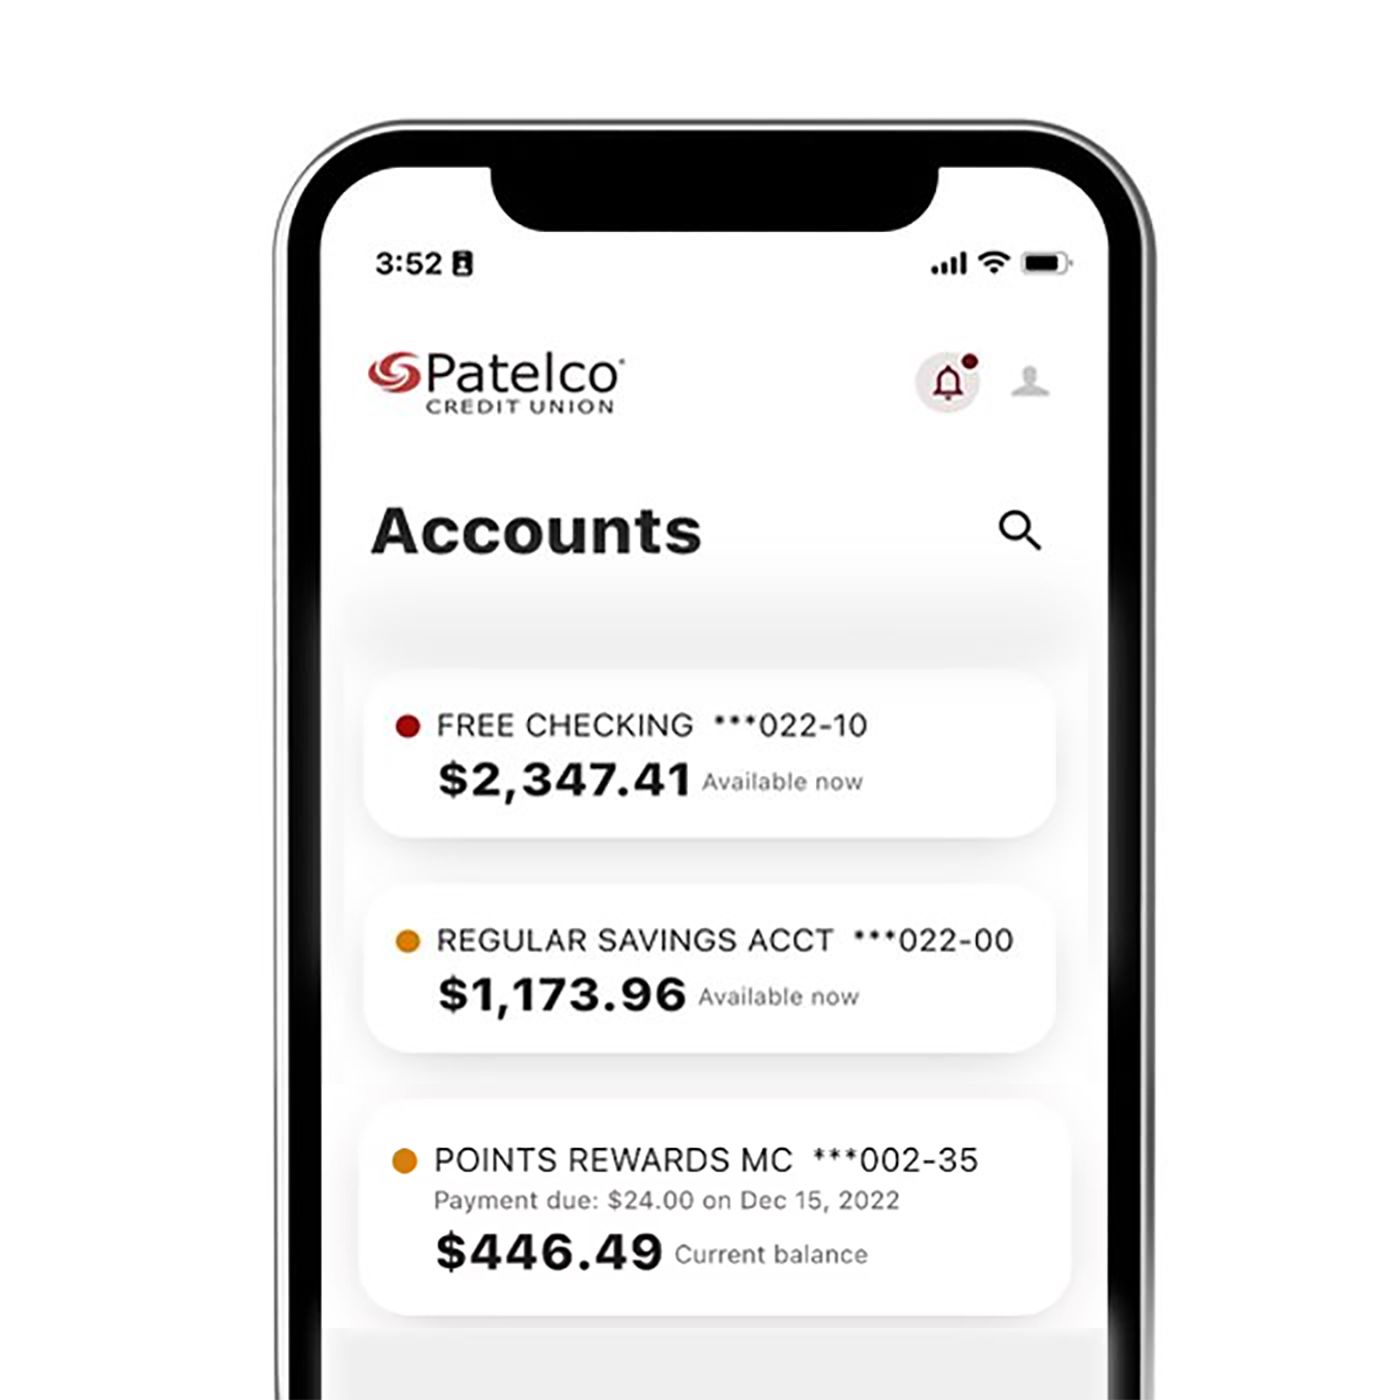 Patelco Credit Union's mobile app showing the account view